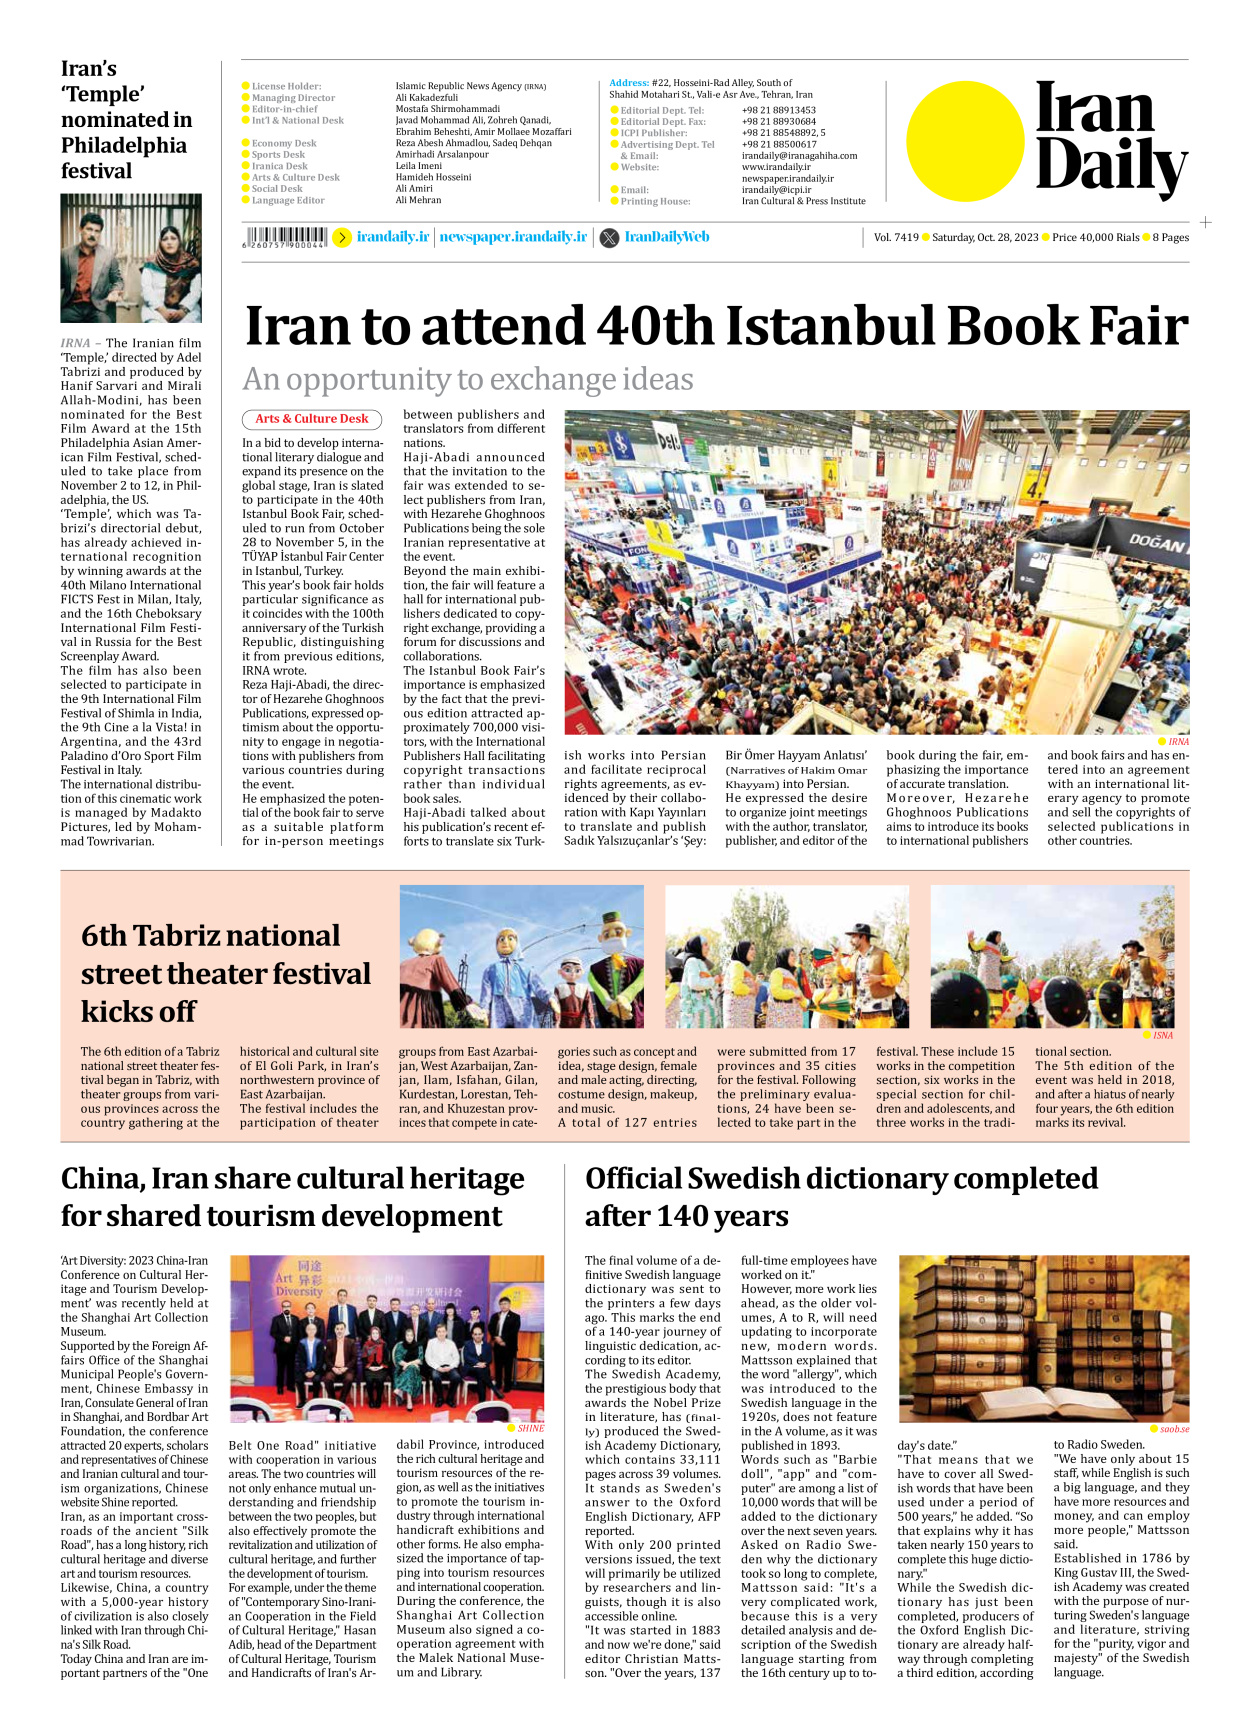 Iran Daily - Number Seven Thousand Four Hundred and Nineteen - 28 October 2023 - Page 8